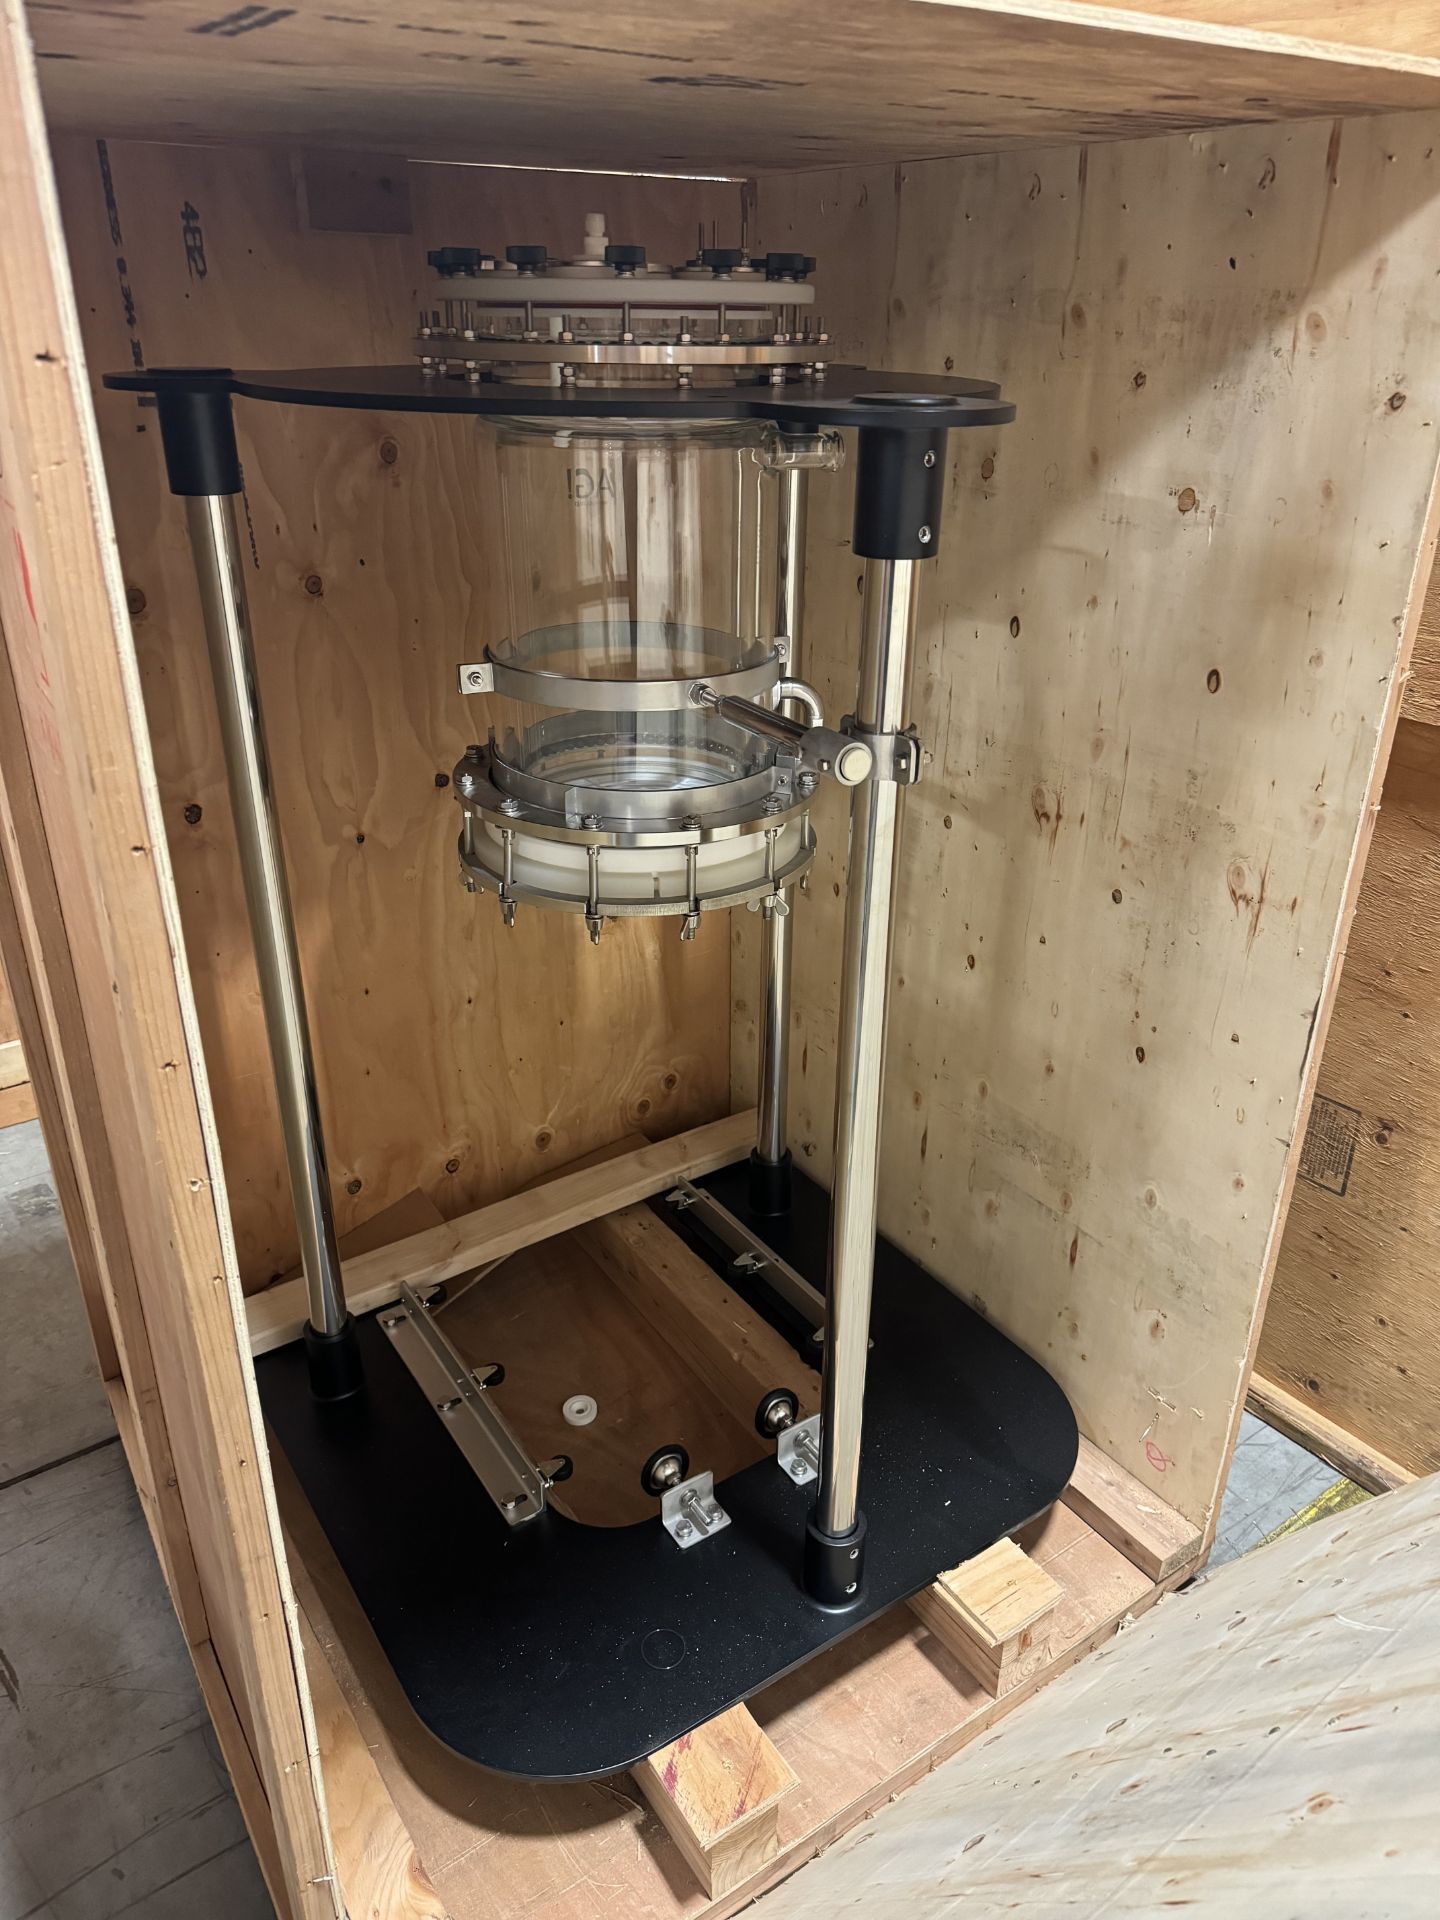 New/Unused 20 L Glass Filter Reactor System. Model CDR-20.